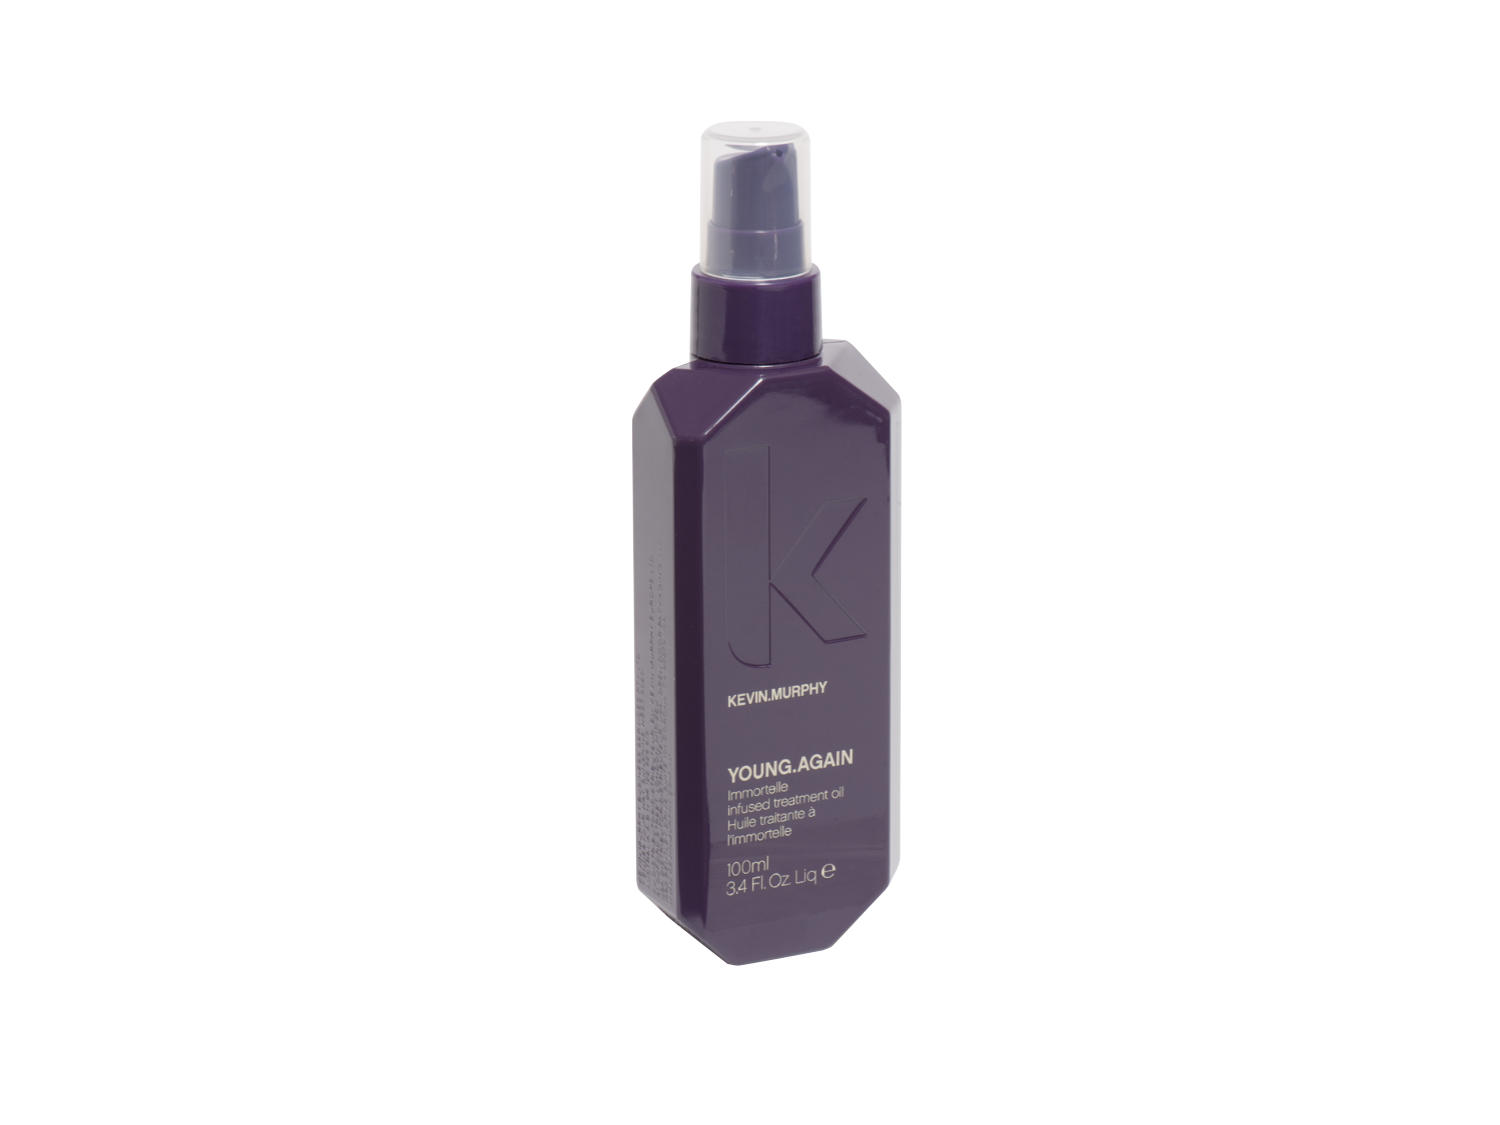 Arma Beauty - Kevin Murphy - YOUNG.AGAIN